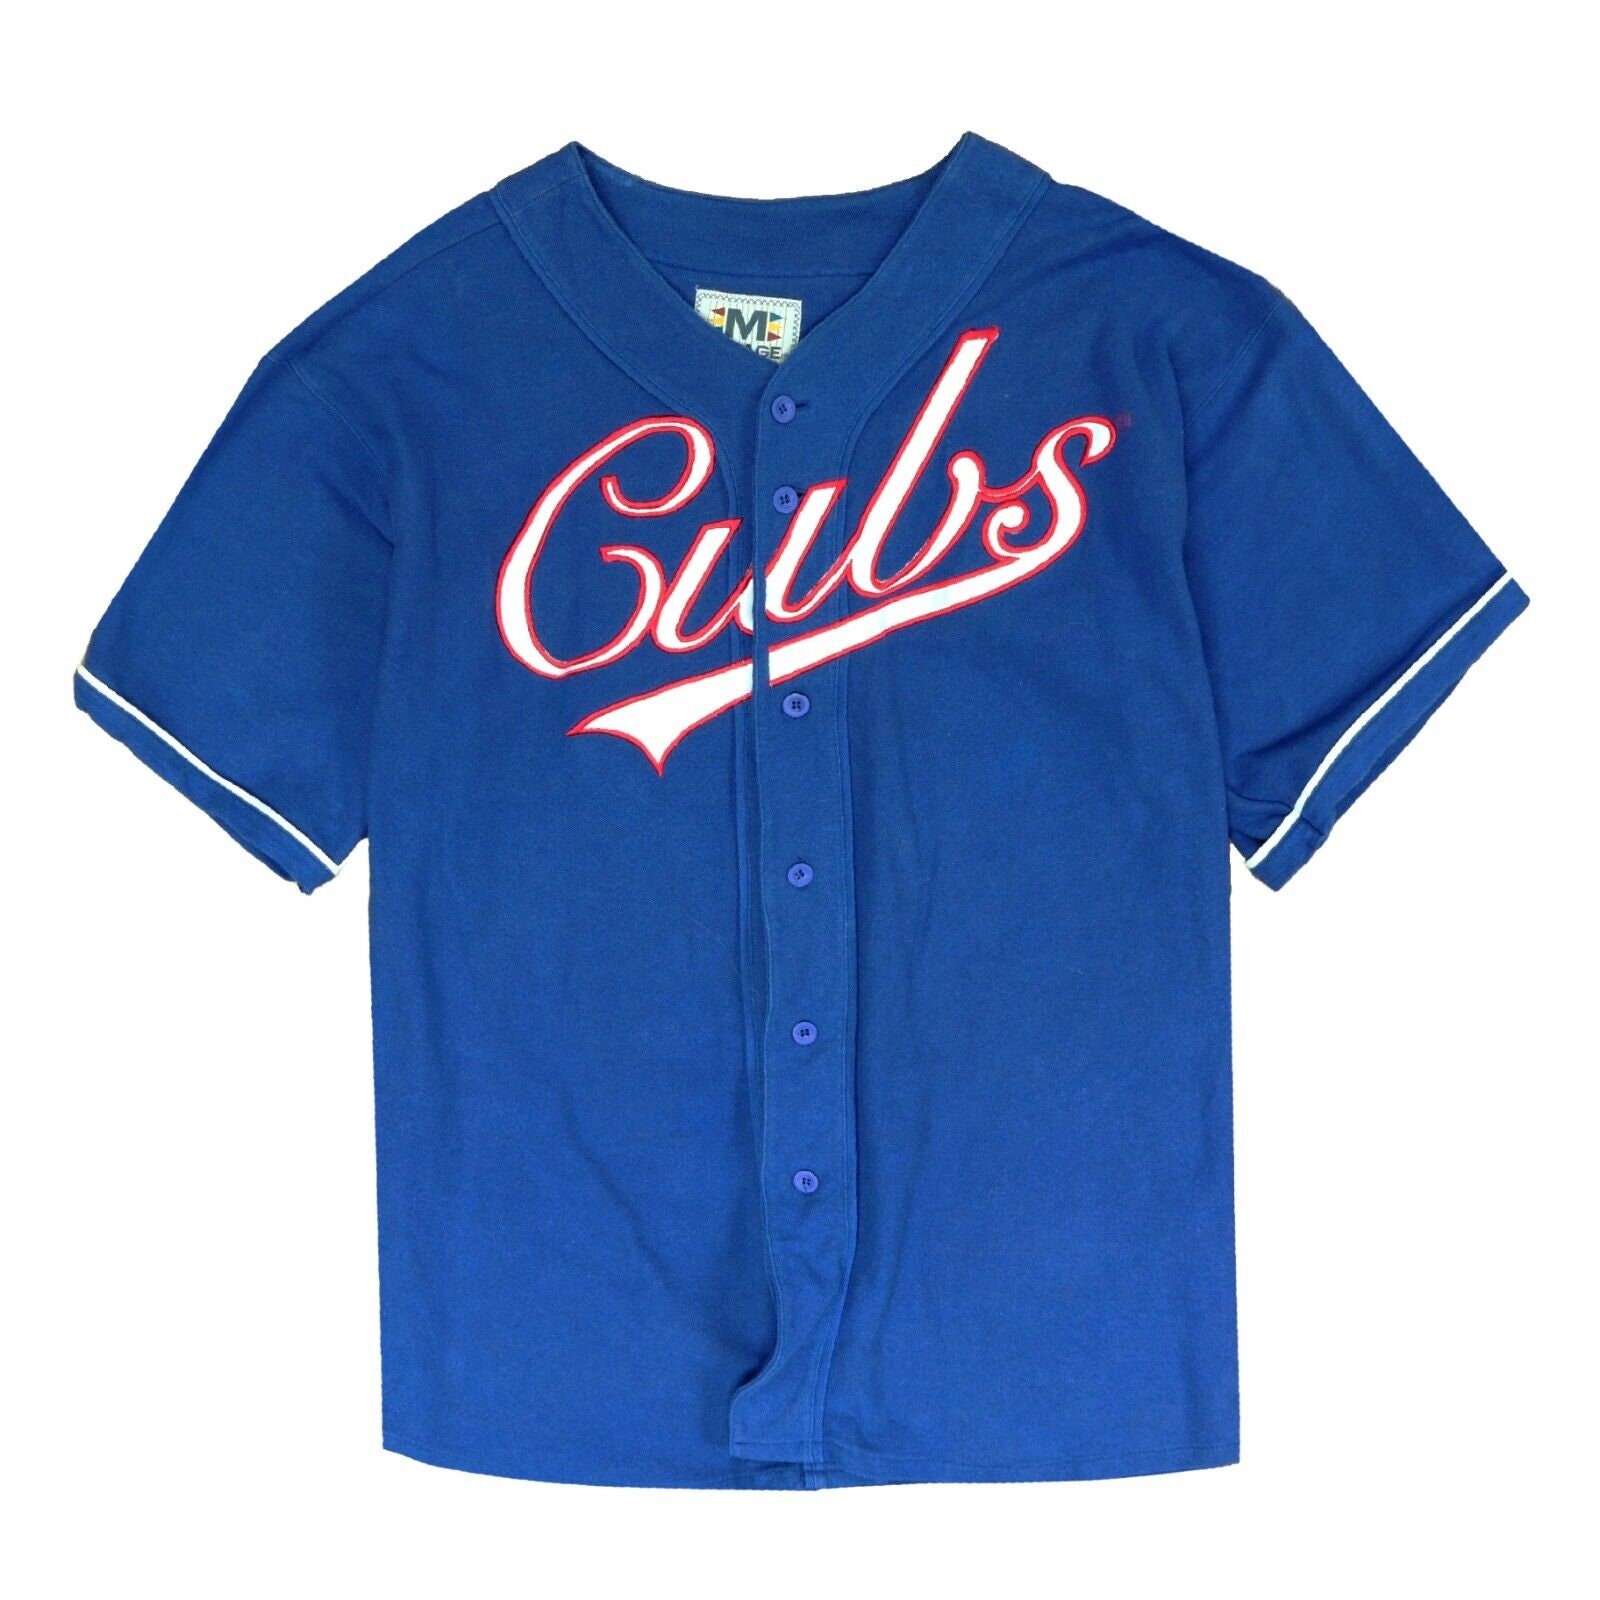 Buy Cubs 90s Jersey Online In India -  India